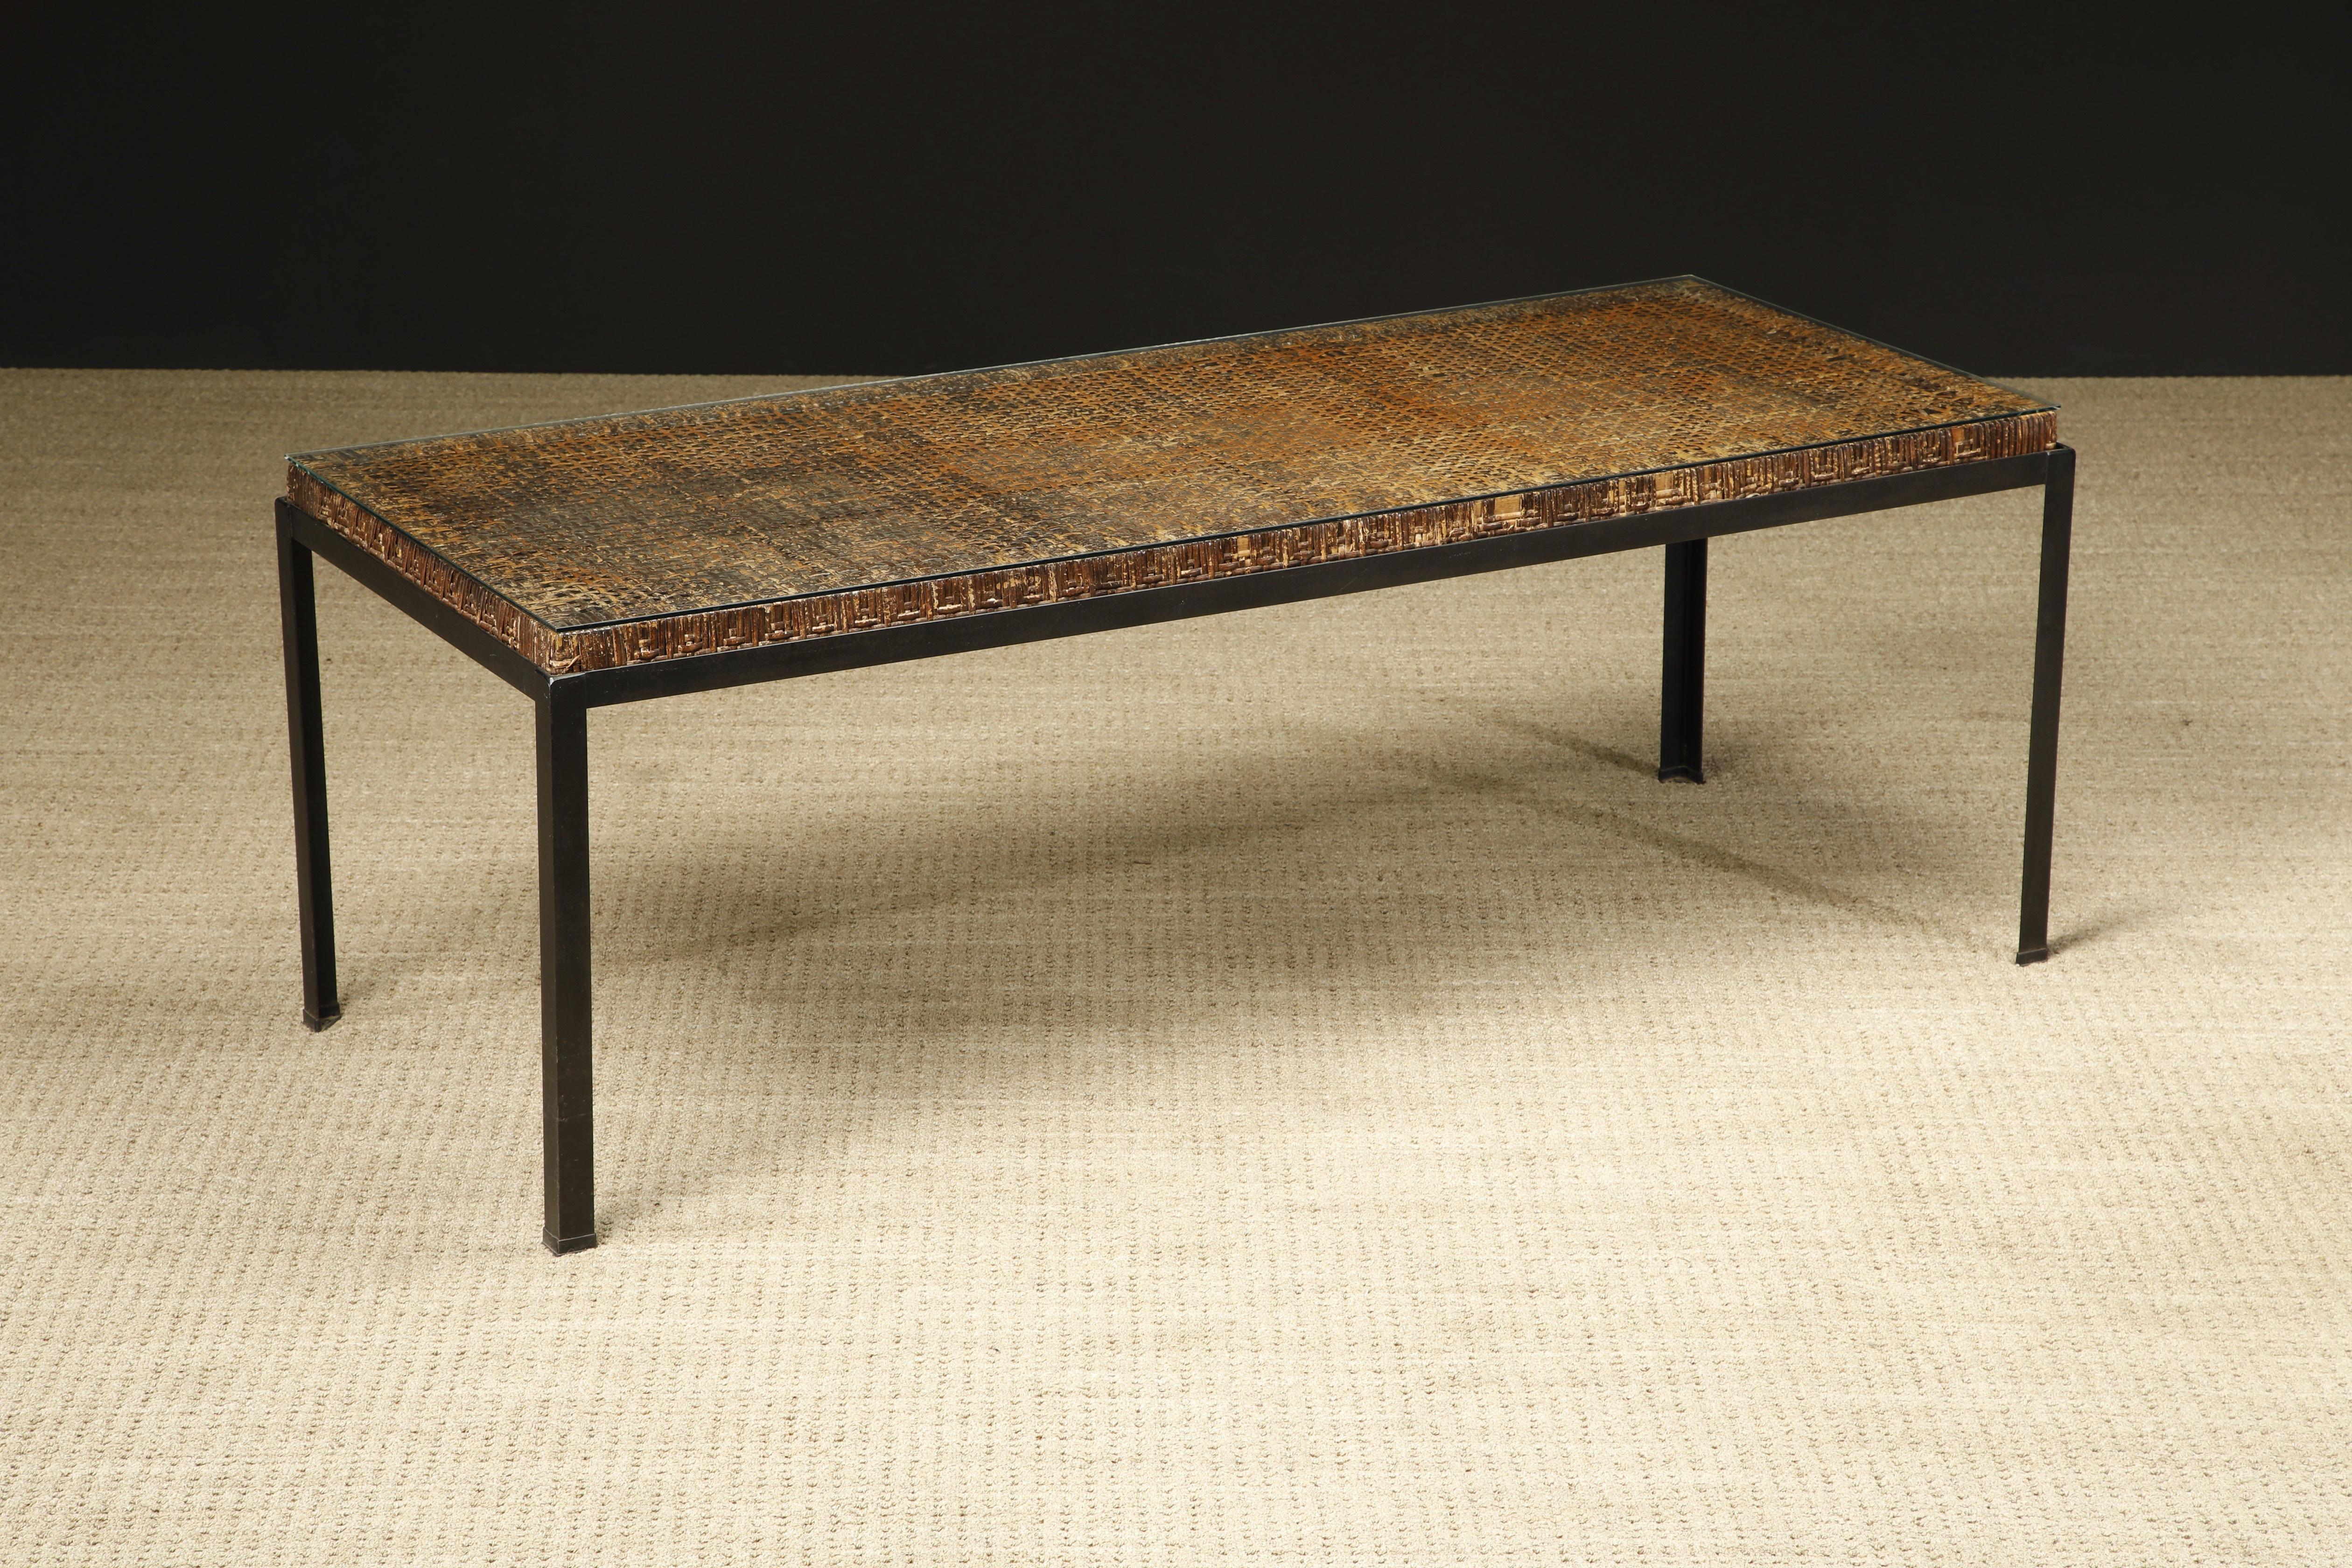 Caned Dining Table by Danny Ho Fong for Tropi-cal in Iron and Rattan, c 1960s For Sale 3